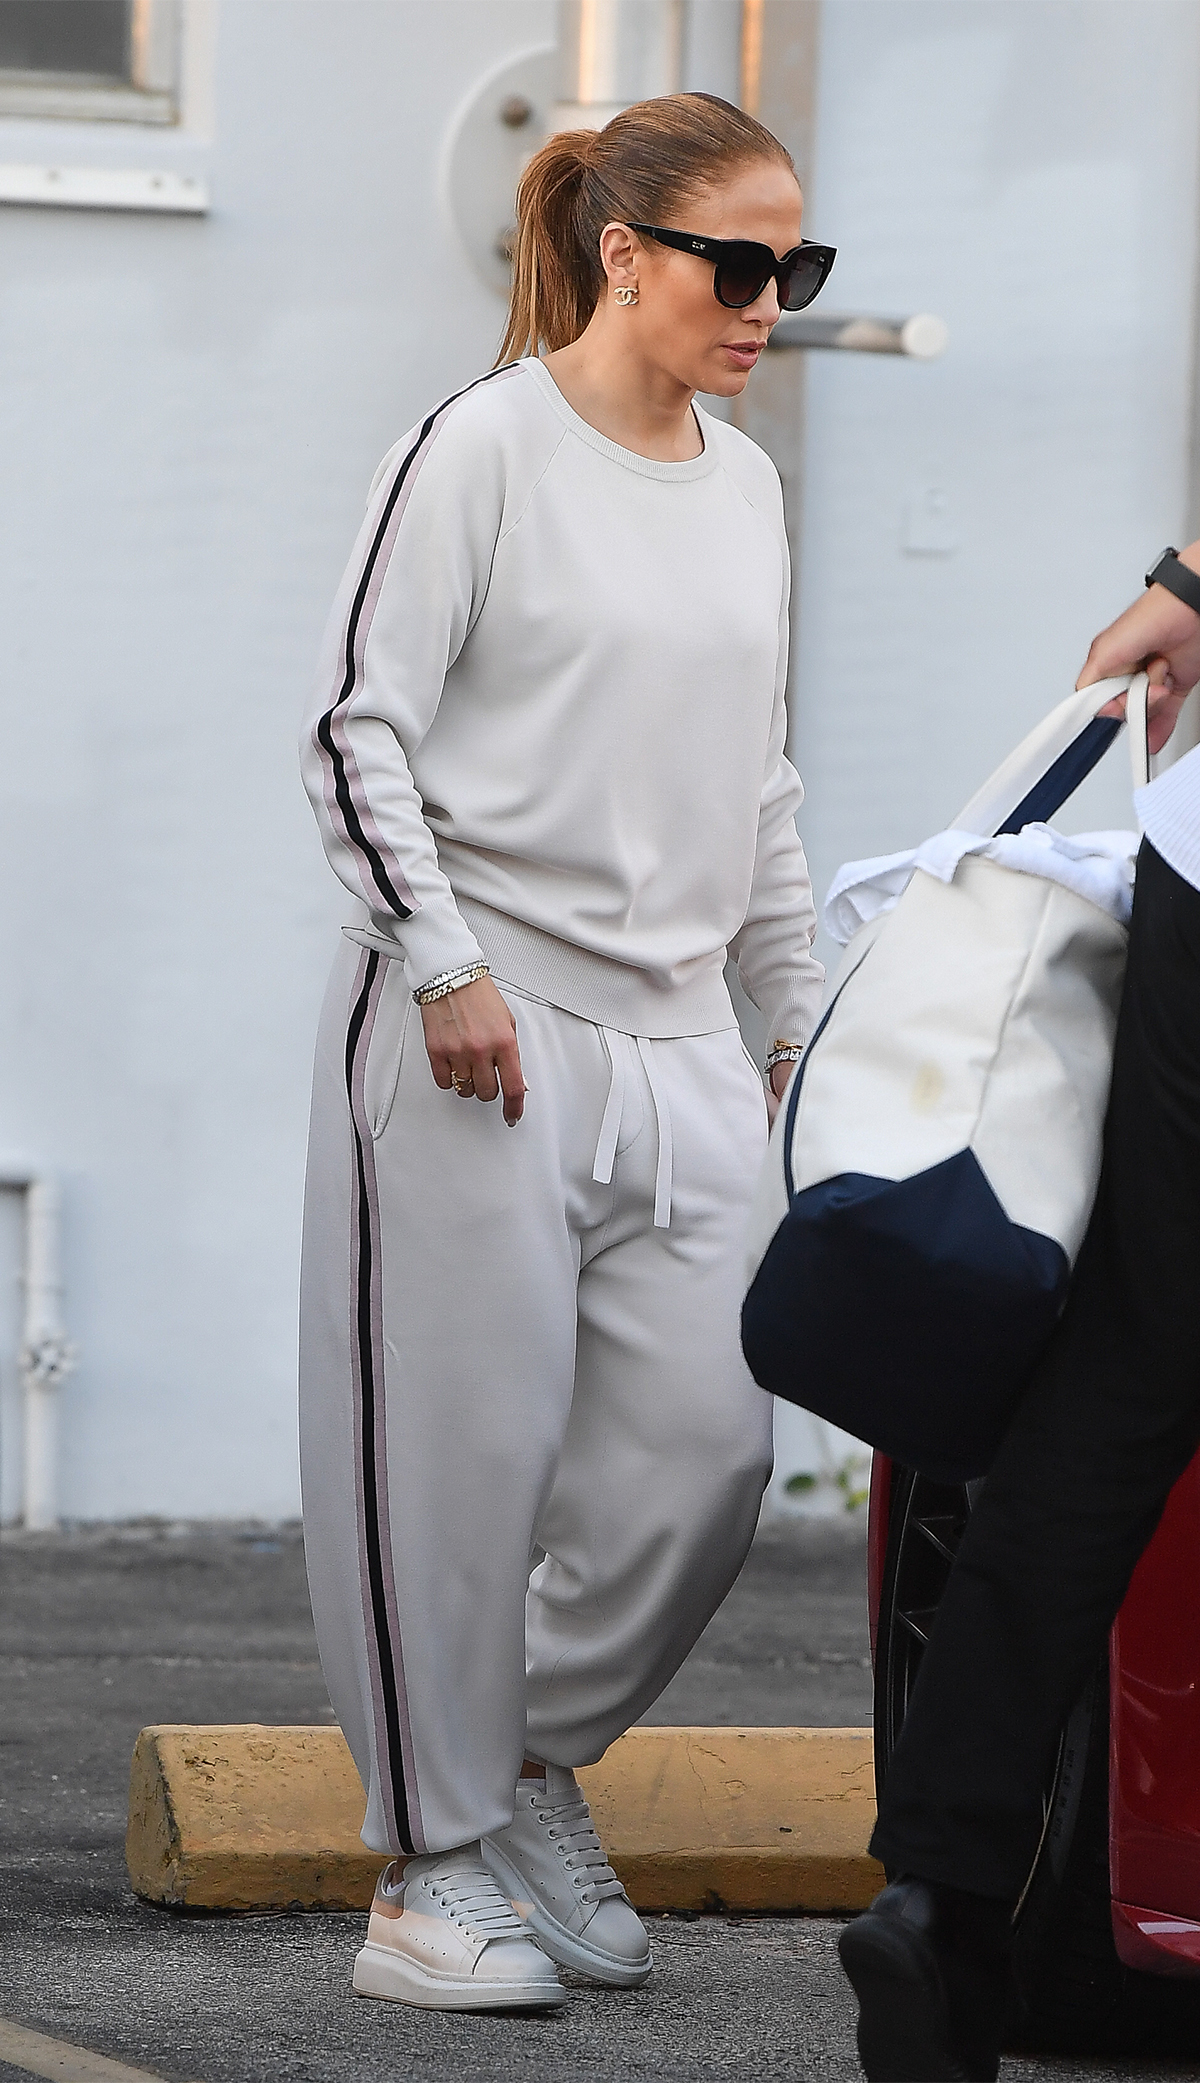 The 9 Celebrity Sweatpants Outfits That Are So Chic | Who What Wear